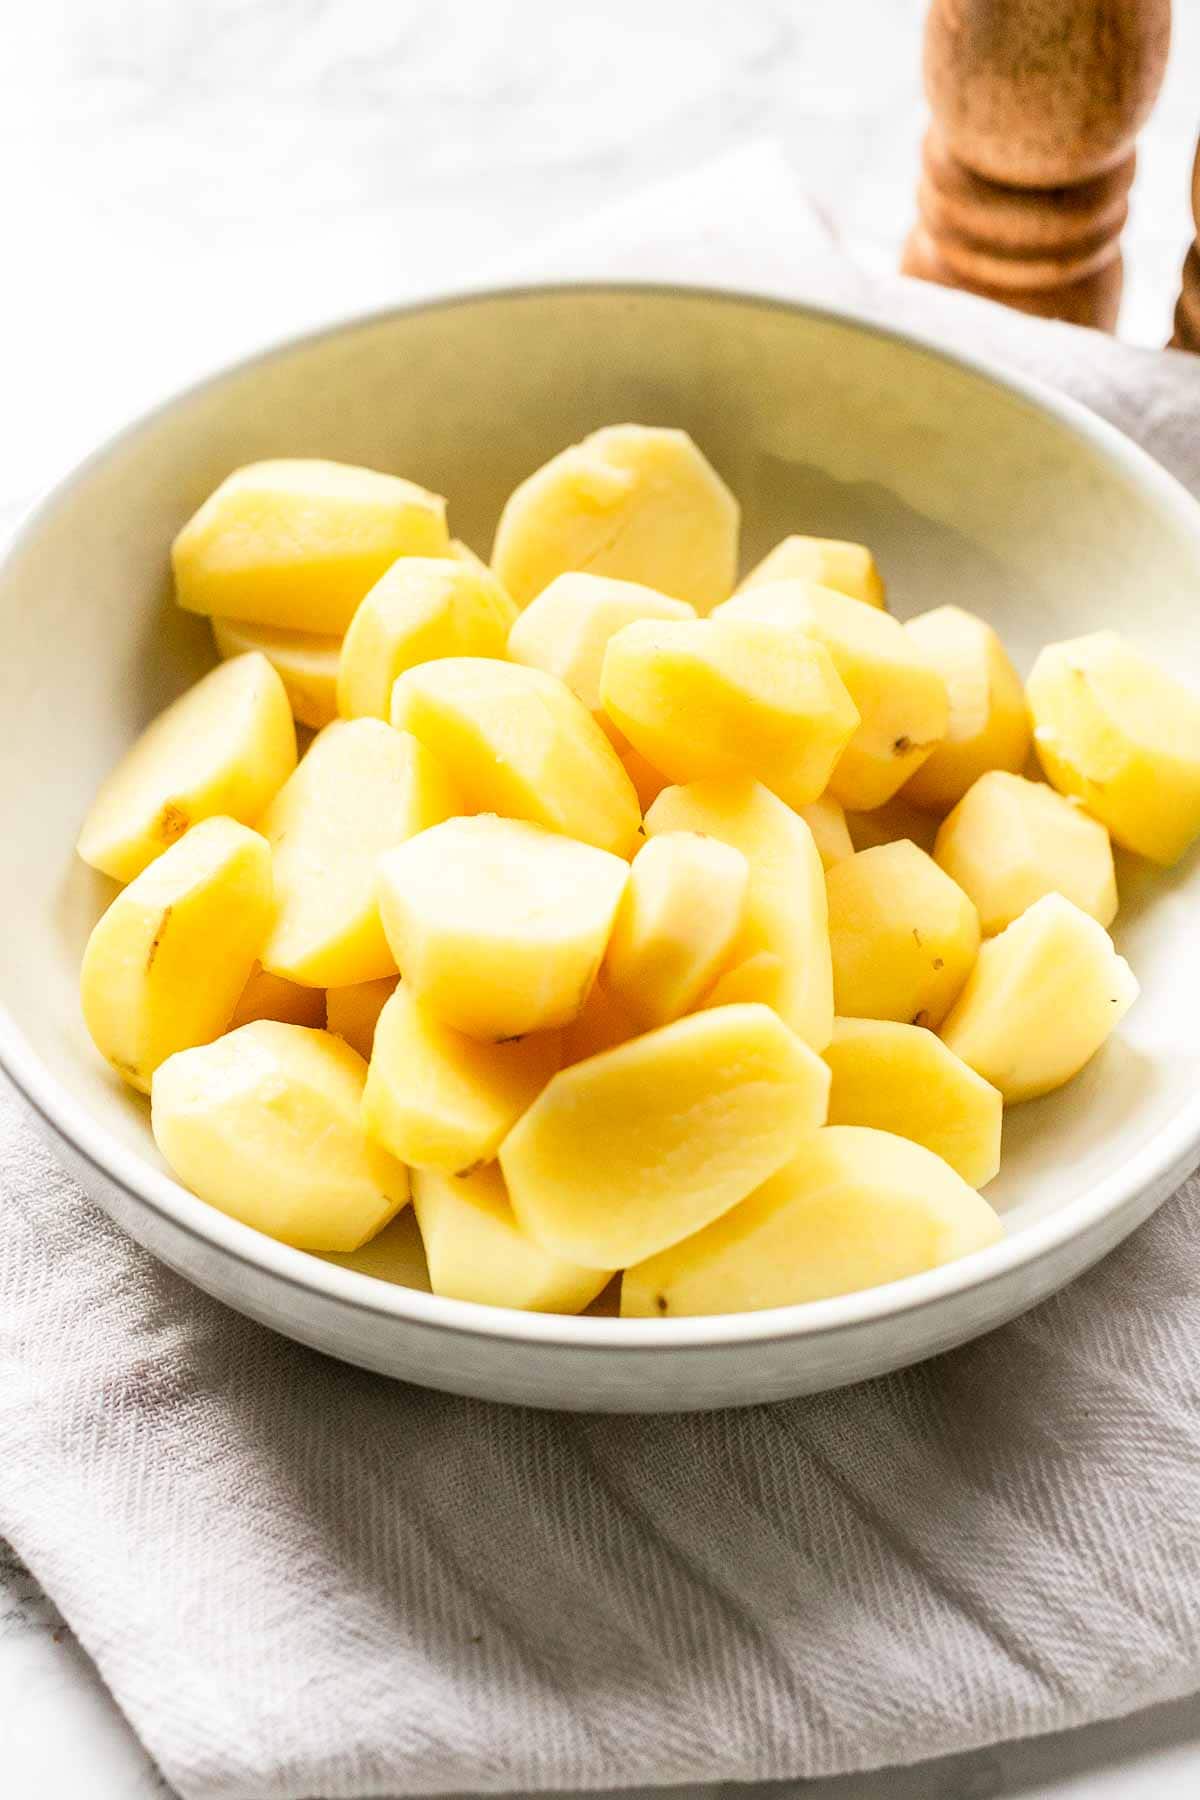 Get perfectly boiled potatoes every time? Make these instant boiled potatoes! In less than 15 minutes, you have soft, steamed, and spongy potatoes on the table. So, if you need boiled potatoes, get your Instant Pot, Crock-Pot Quick Cooker or Pressure Cooker. Want to try? Visit takeoutfood.best for full recipe